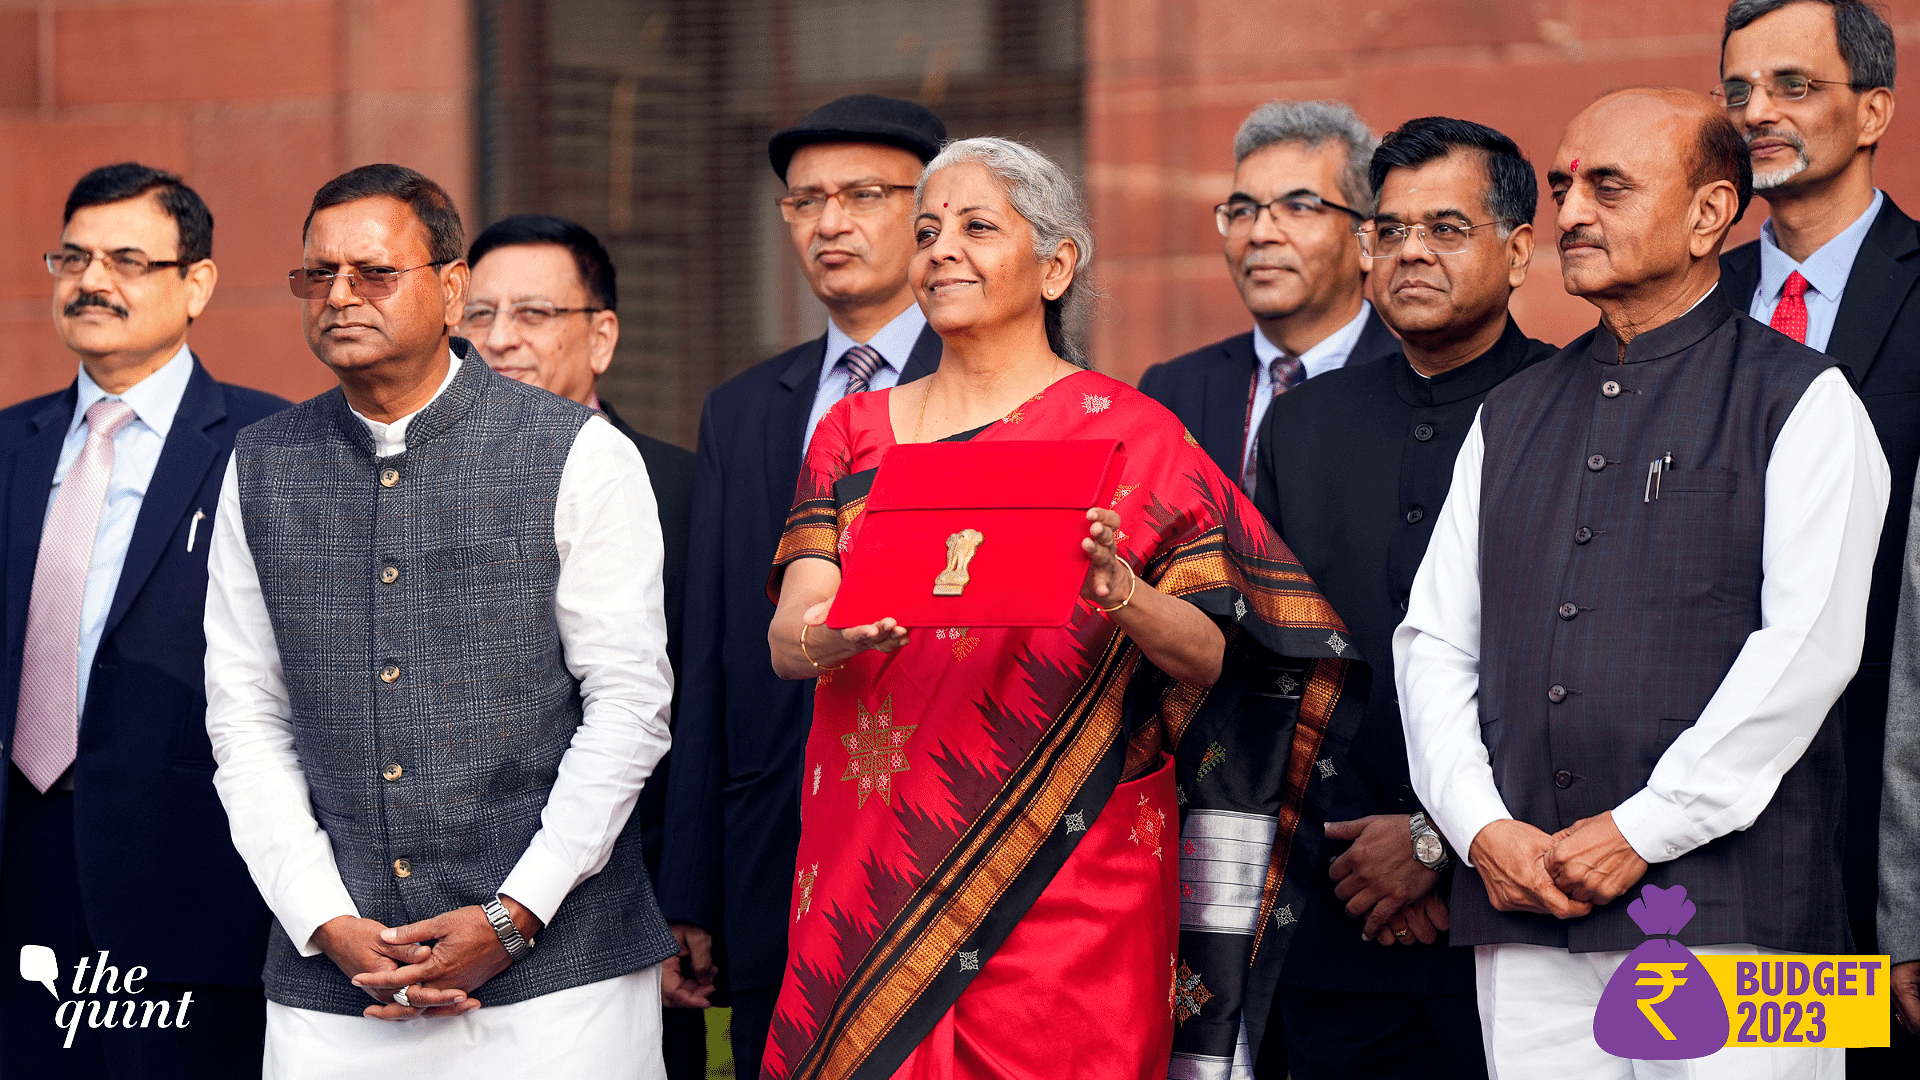 <div class="paragraphs"><p>Union Finance Minister Nirmala Sitharaman with Ministers of State Bhagwat Kishanrao Karad and Pankaj Chaudhary and officials poses for photographs outside the Finance Ministry at North Block, in New Delhi, Wednesday, Feb. 1, 2023, ahead of the presentation of the Union Budget 2023-24. </p></div>